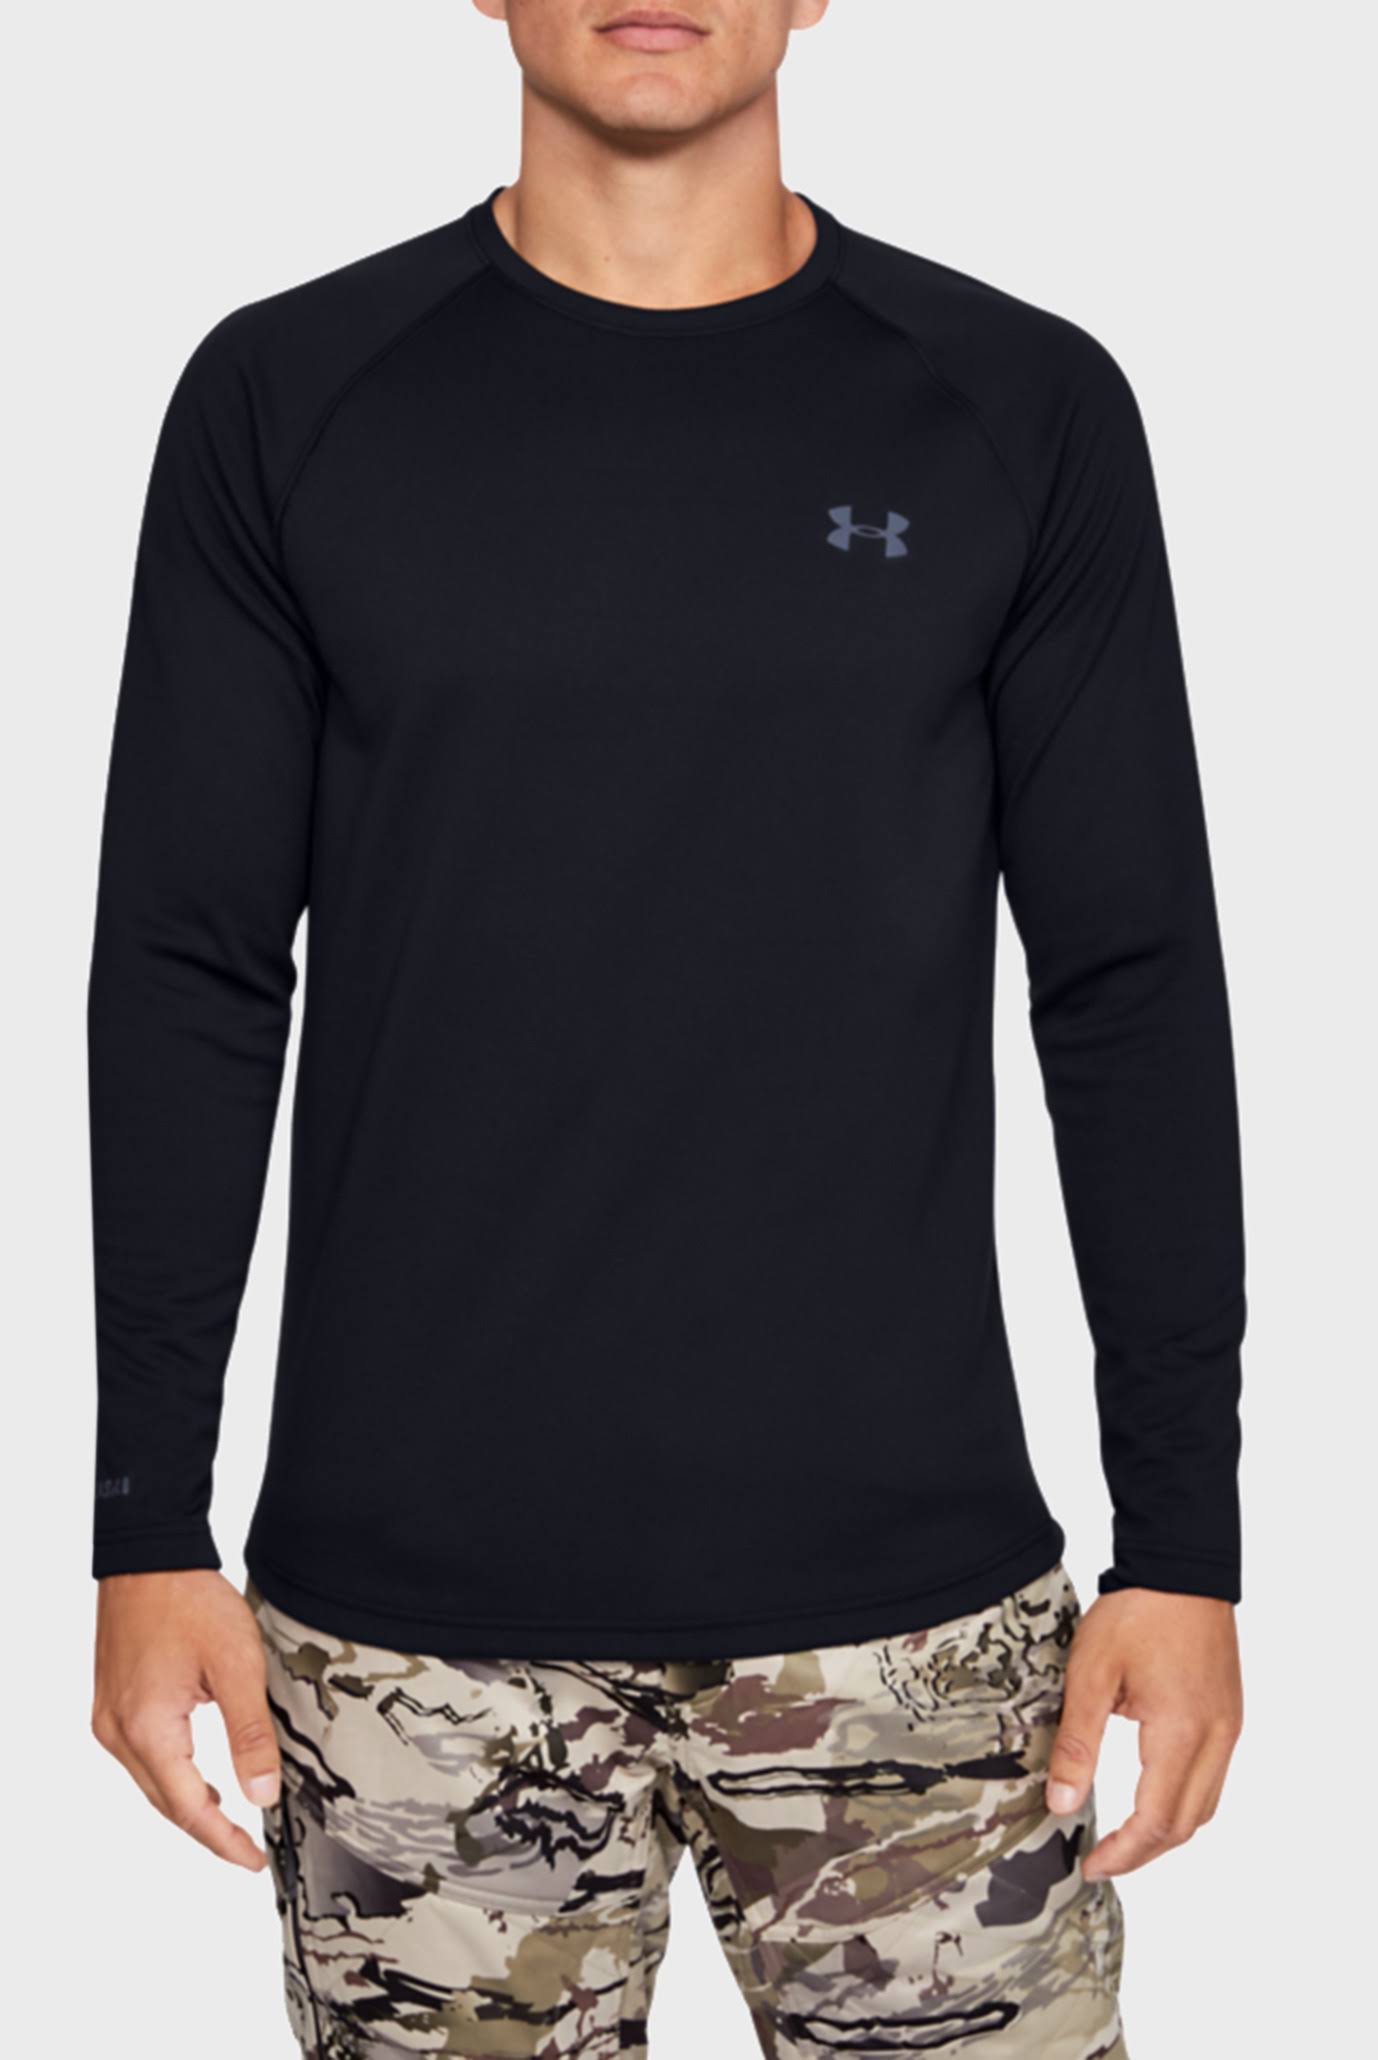 Under Armour Men's Packaged Base 2.0 Crew - Black